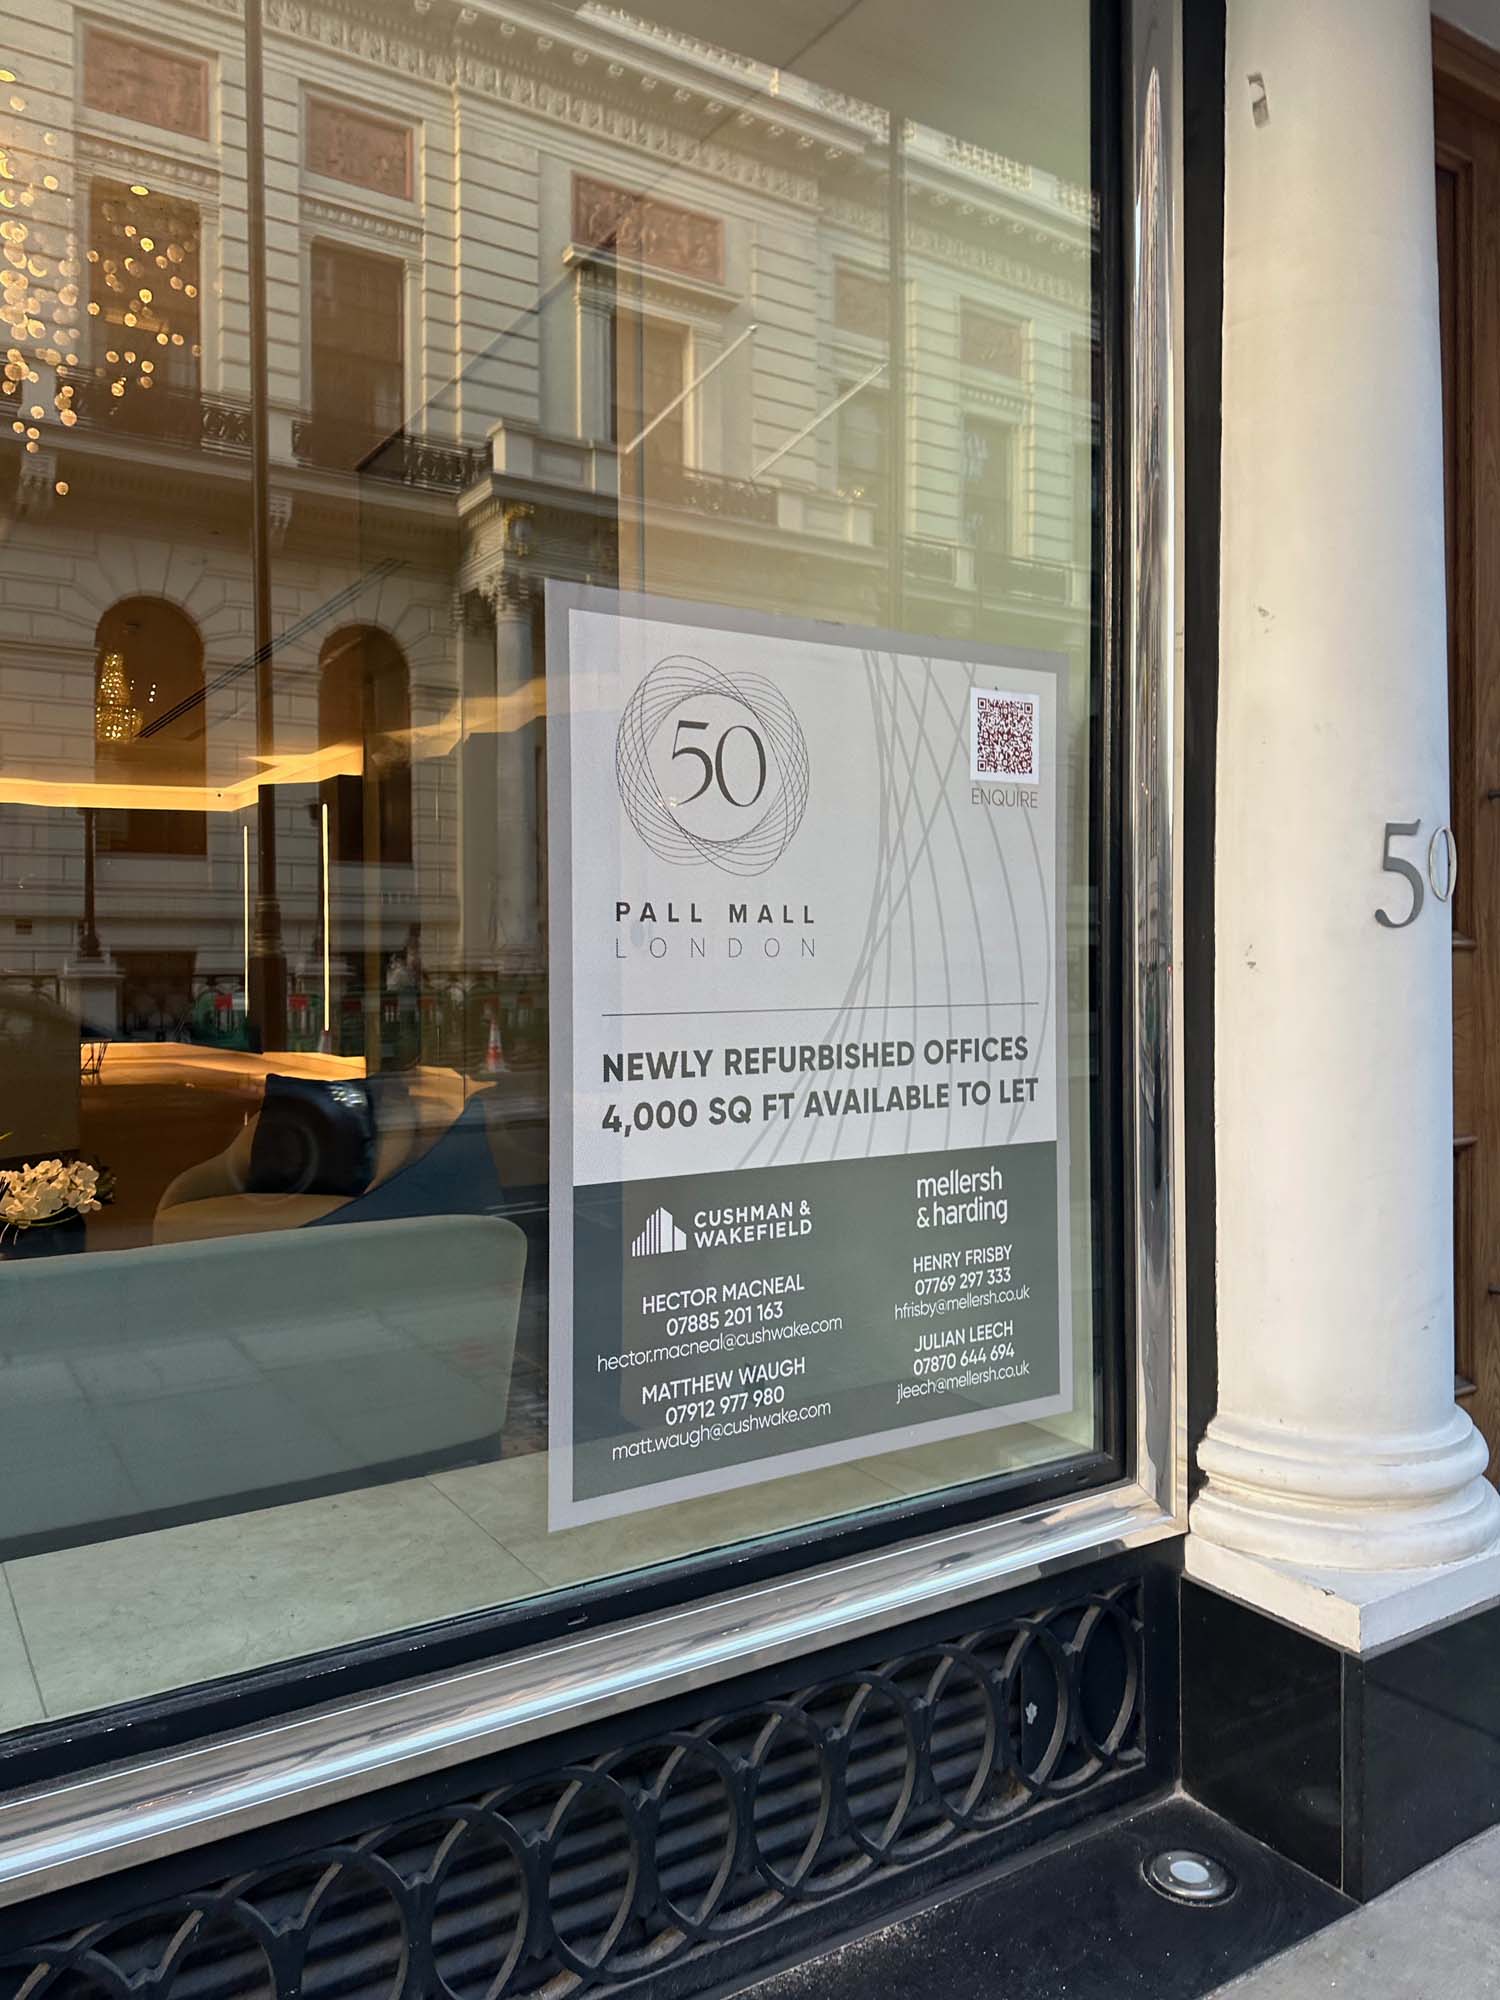 Newly refurbished offices to let at 50 Pall Mall